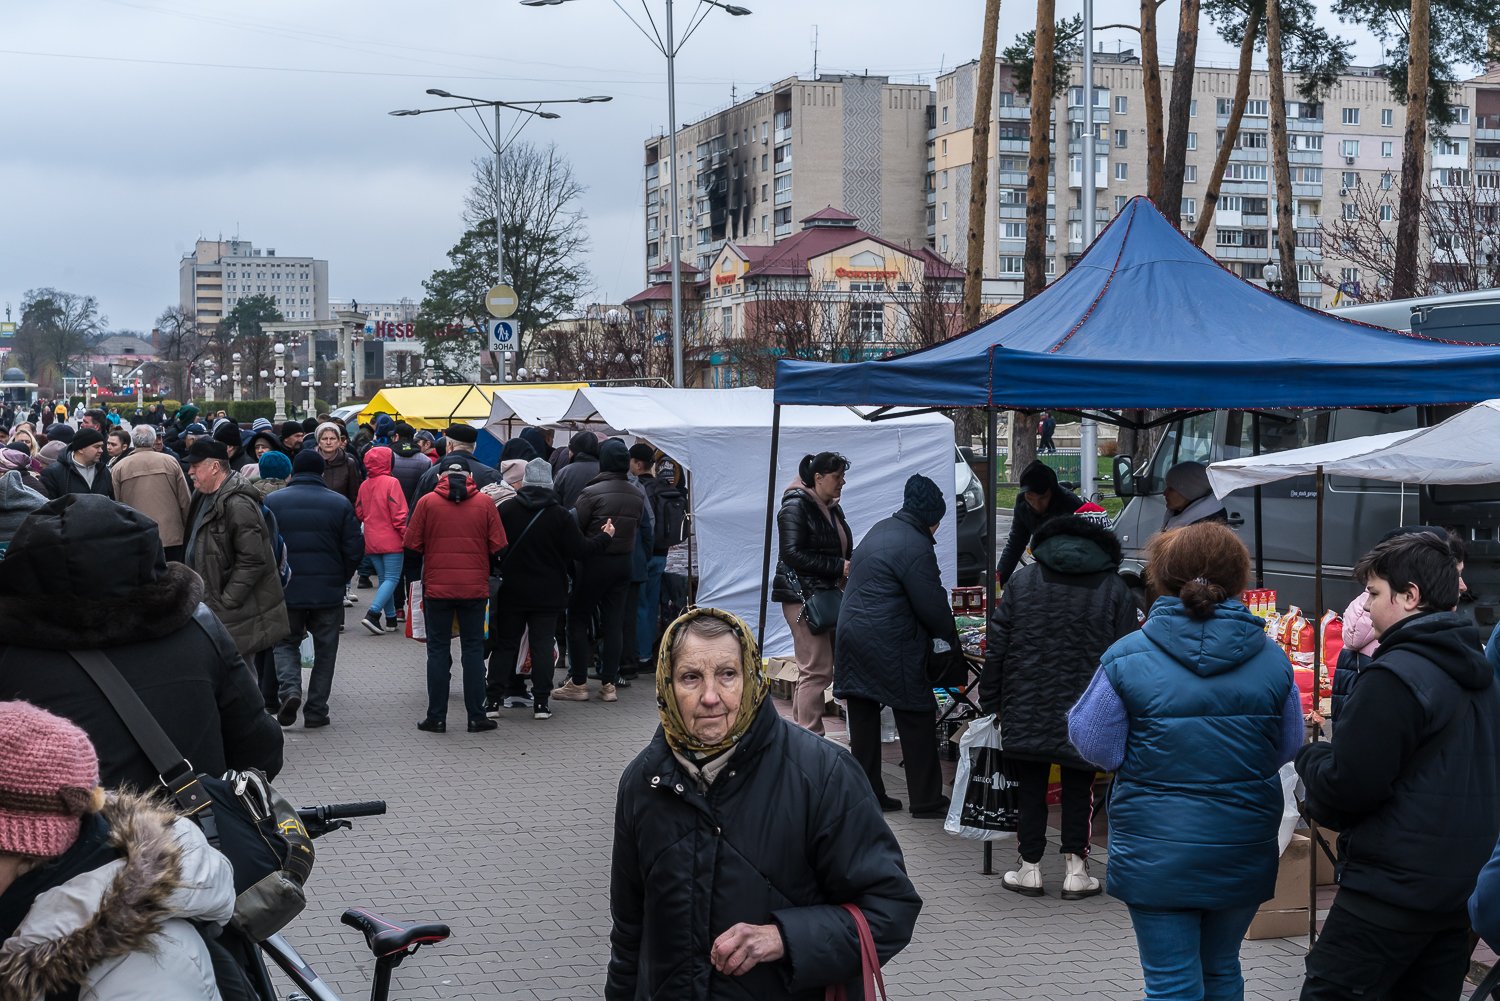  Shoppers at a street market in the city center on Thursday, April 21, 2022 in Irpin, Ukraine. 